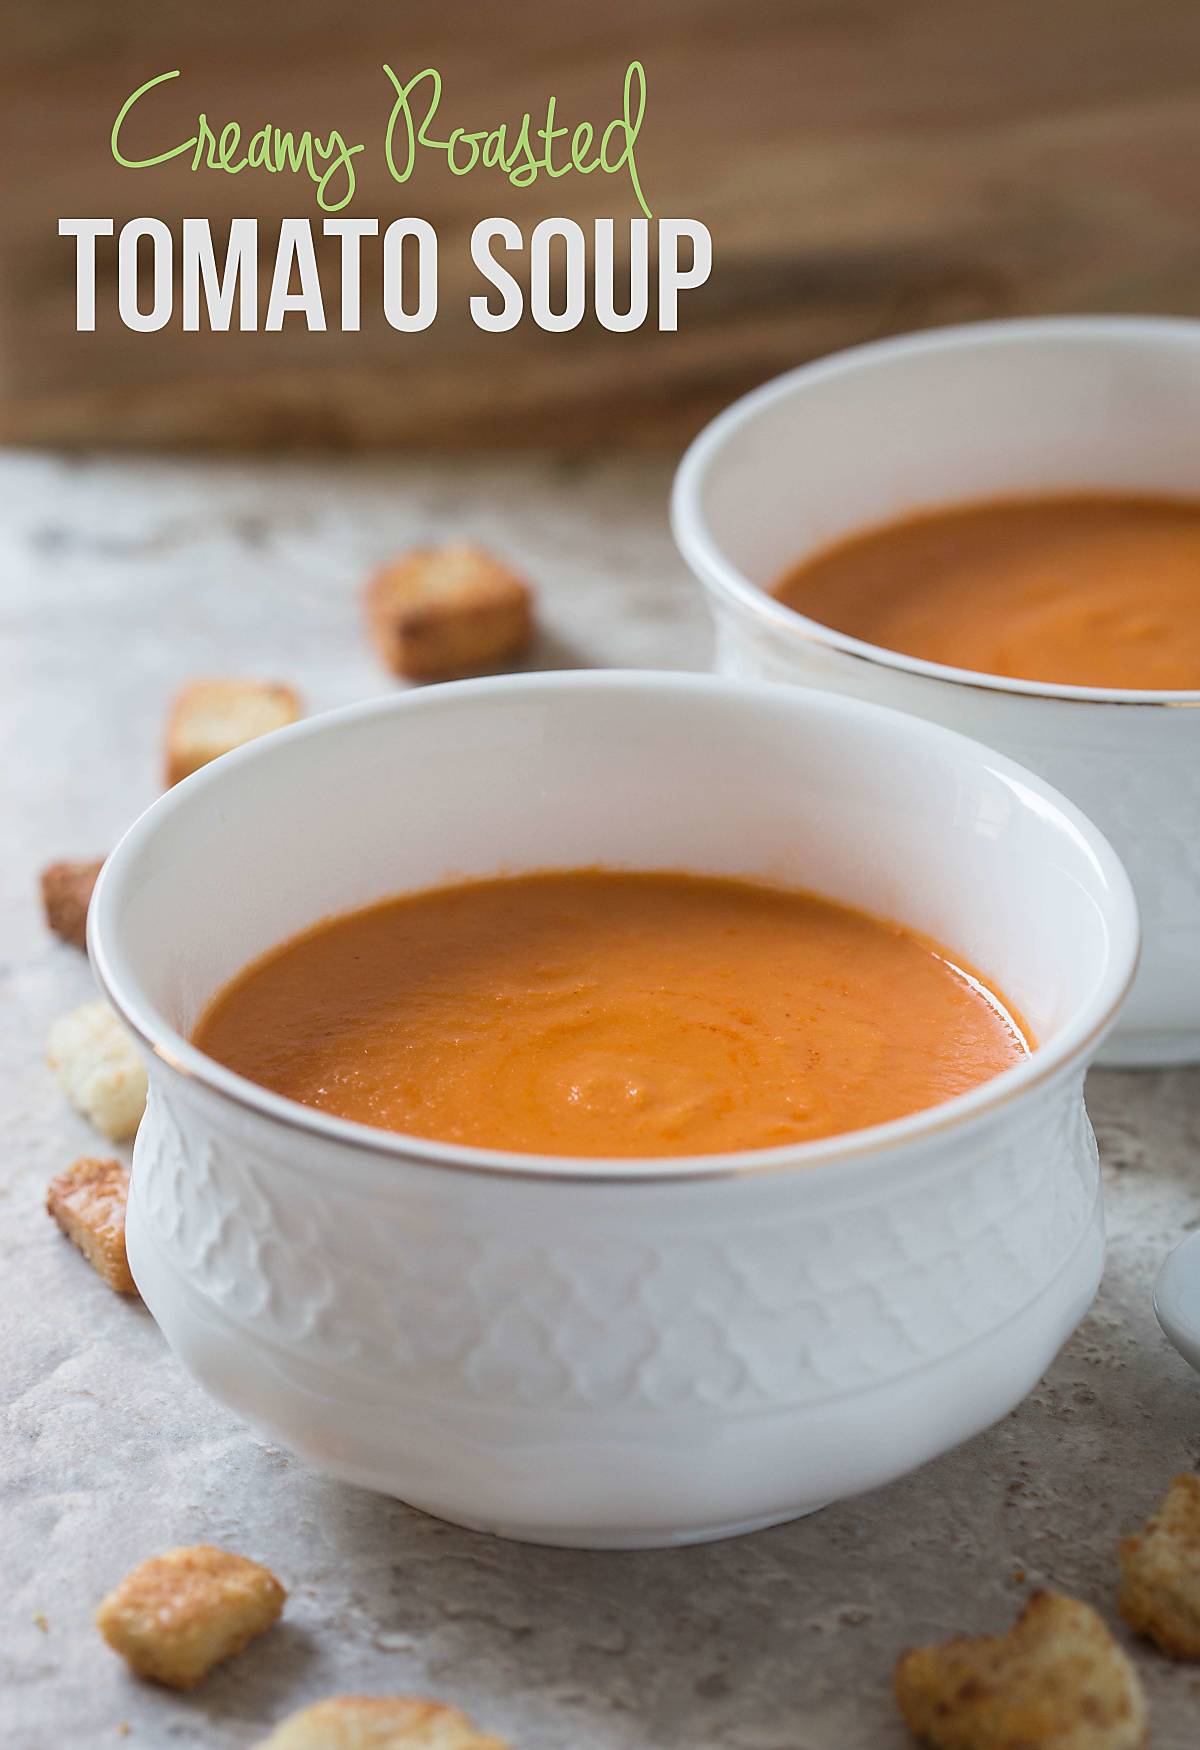 This easy roasted tomato soup involves very less preparation time. Doesn't require additional skills to make this delicious soup and no need to babysit this one when making.